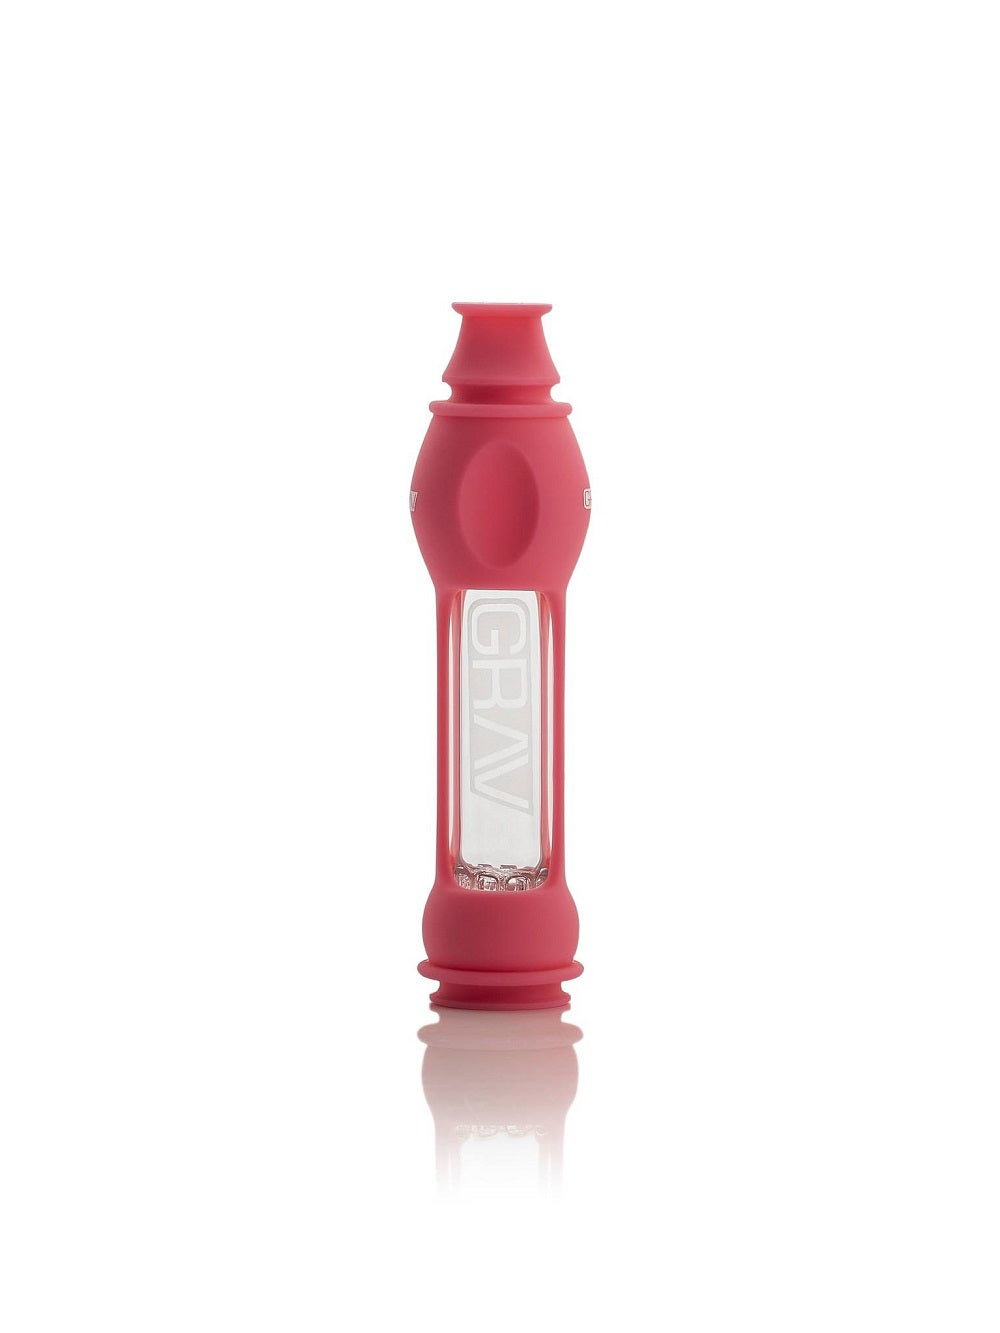 GRAV® Octo-Taster with Silicone Skin - 16mm